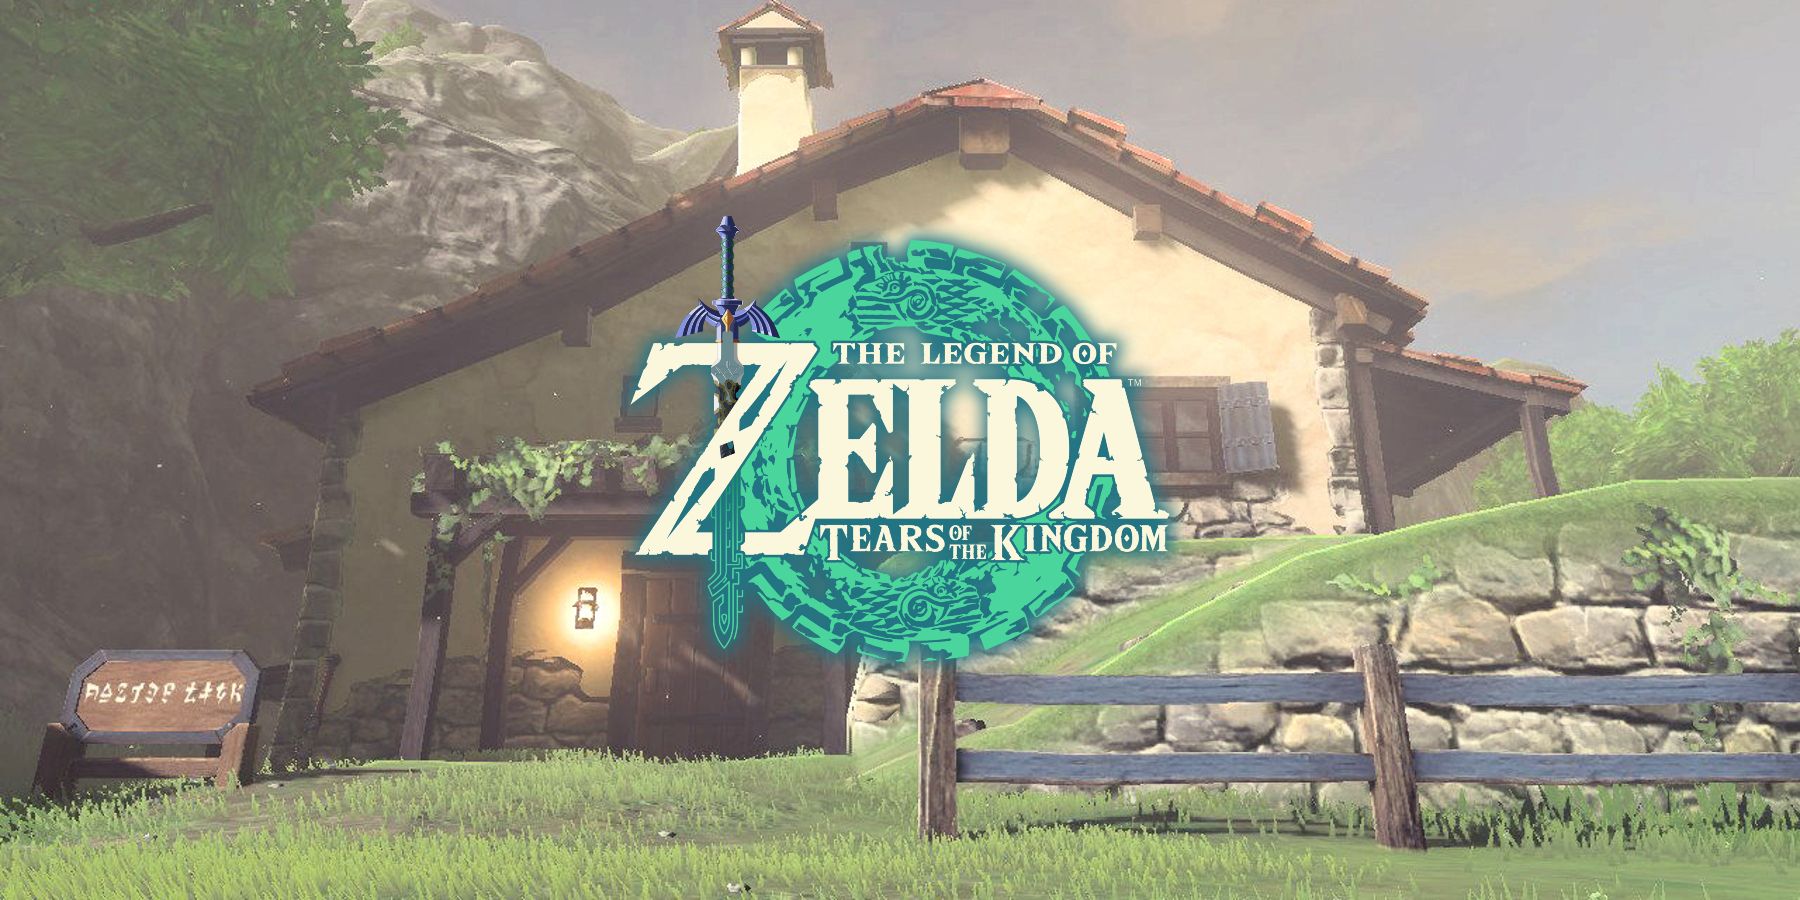 Link's House from Breath of the Wild with Tears of the Kingdom's logo overlaid.